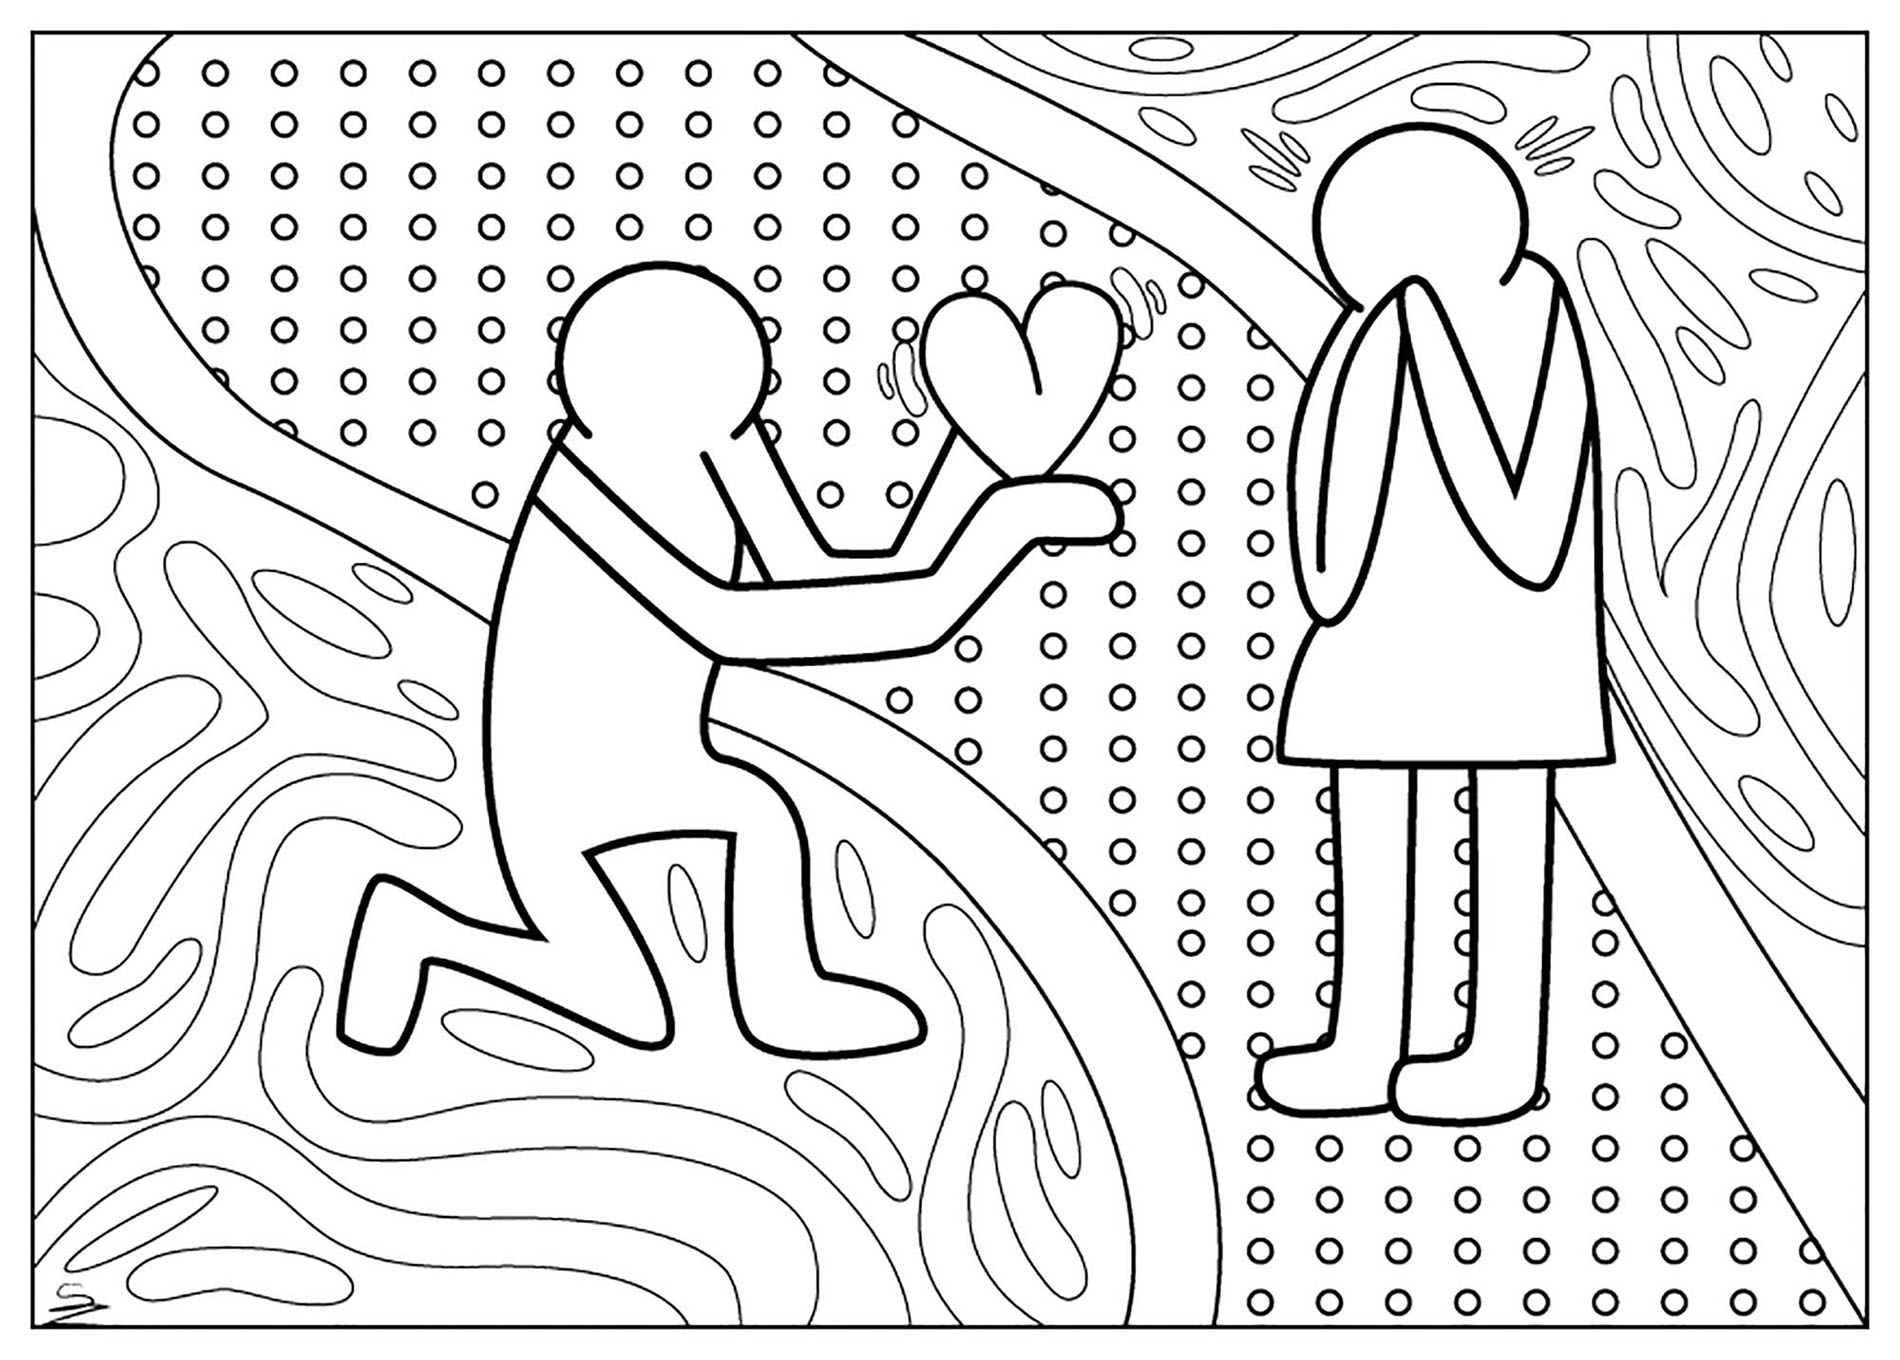 Keith haring coloring pages to download